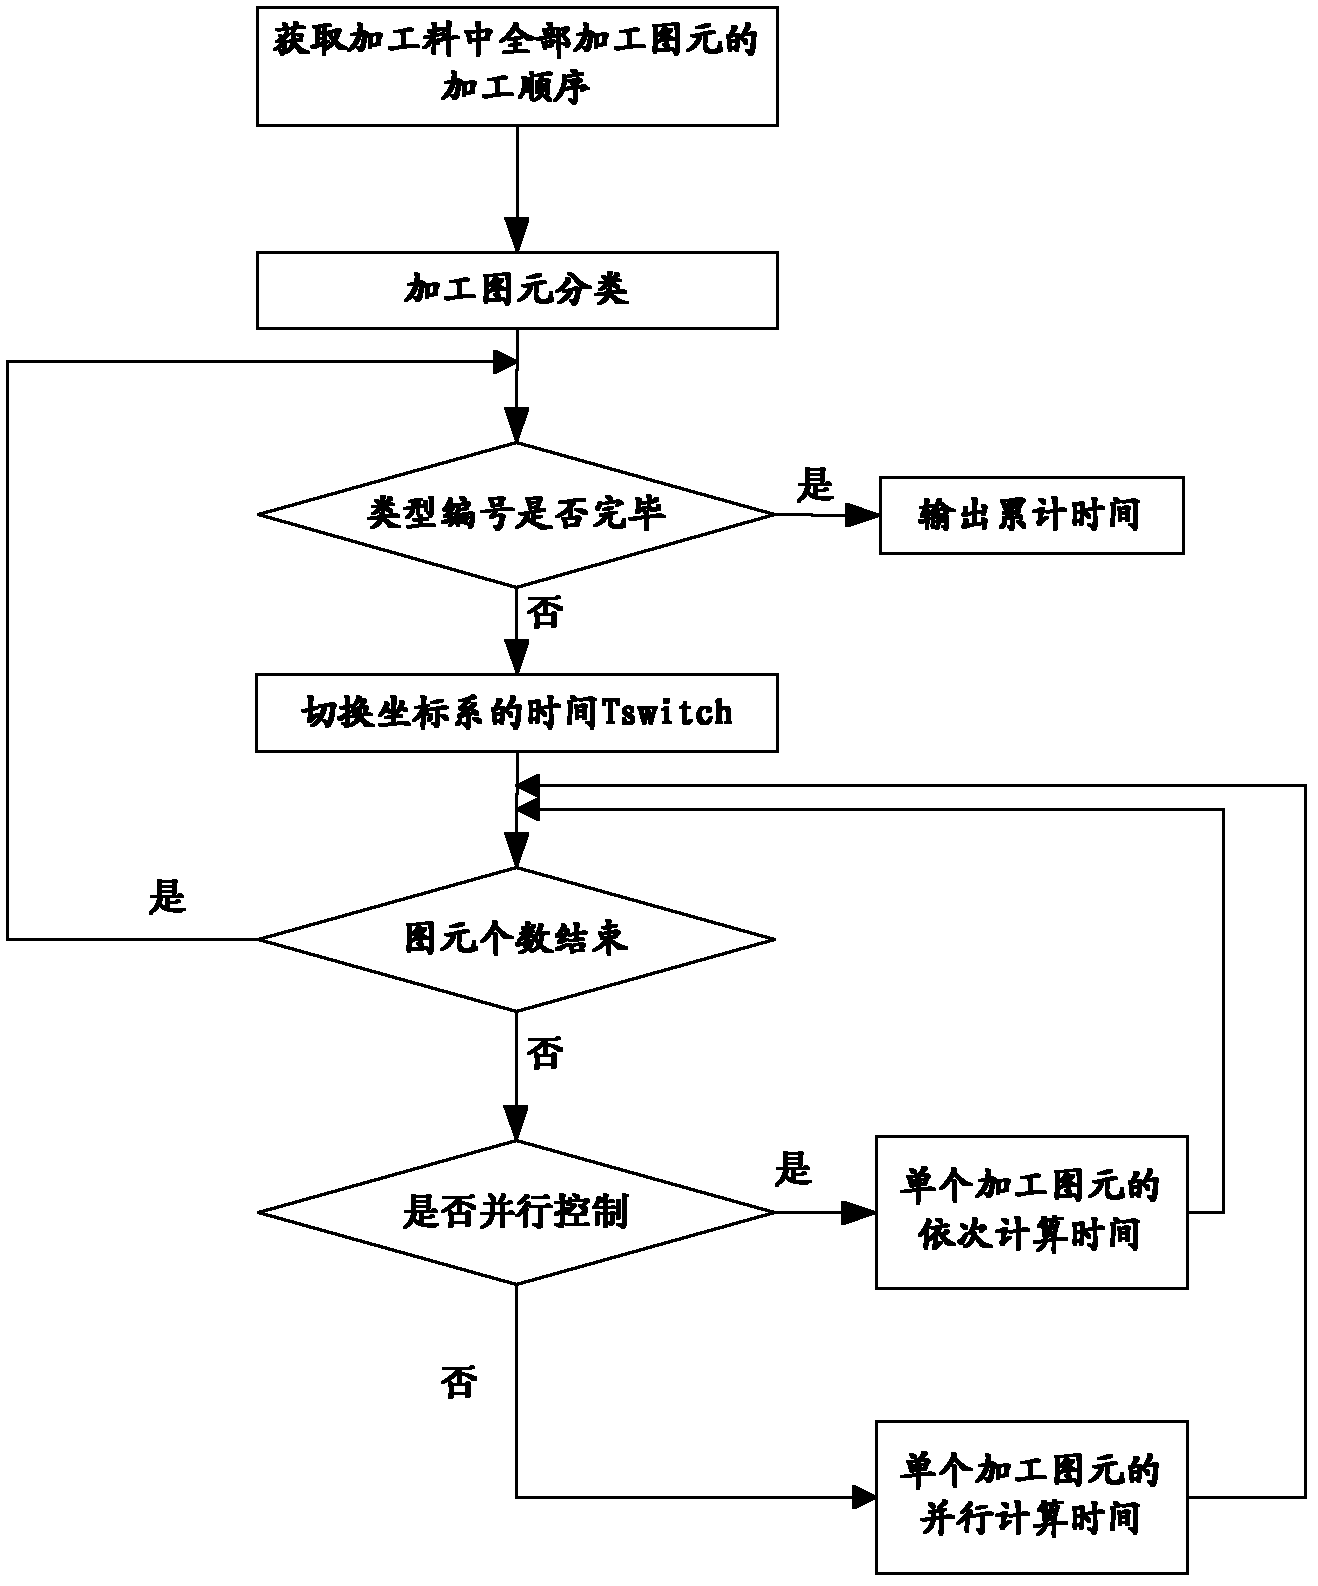 Concurrent control processing time virtual computing method of numerical control pattern-punching machine